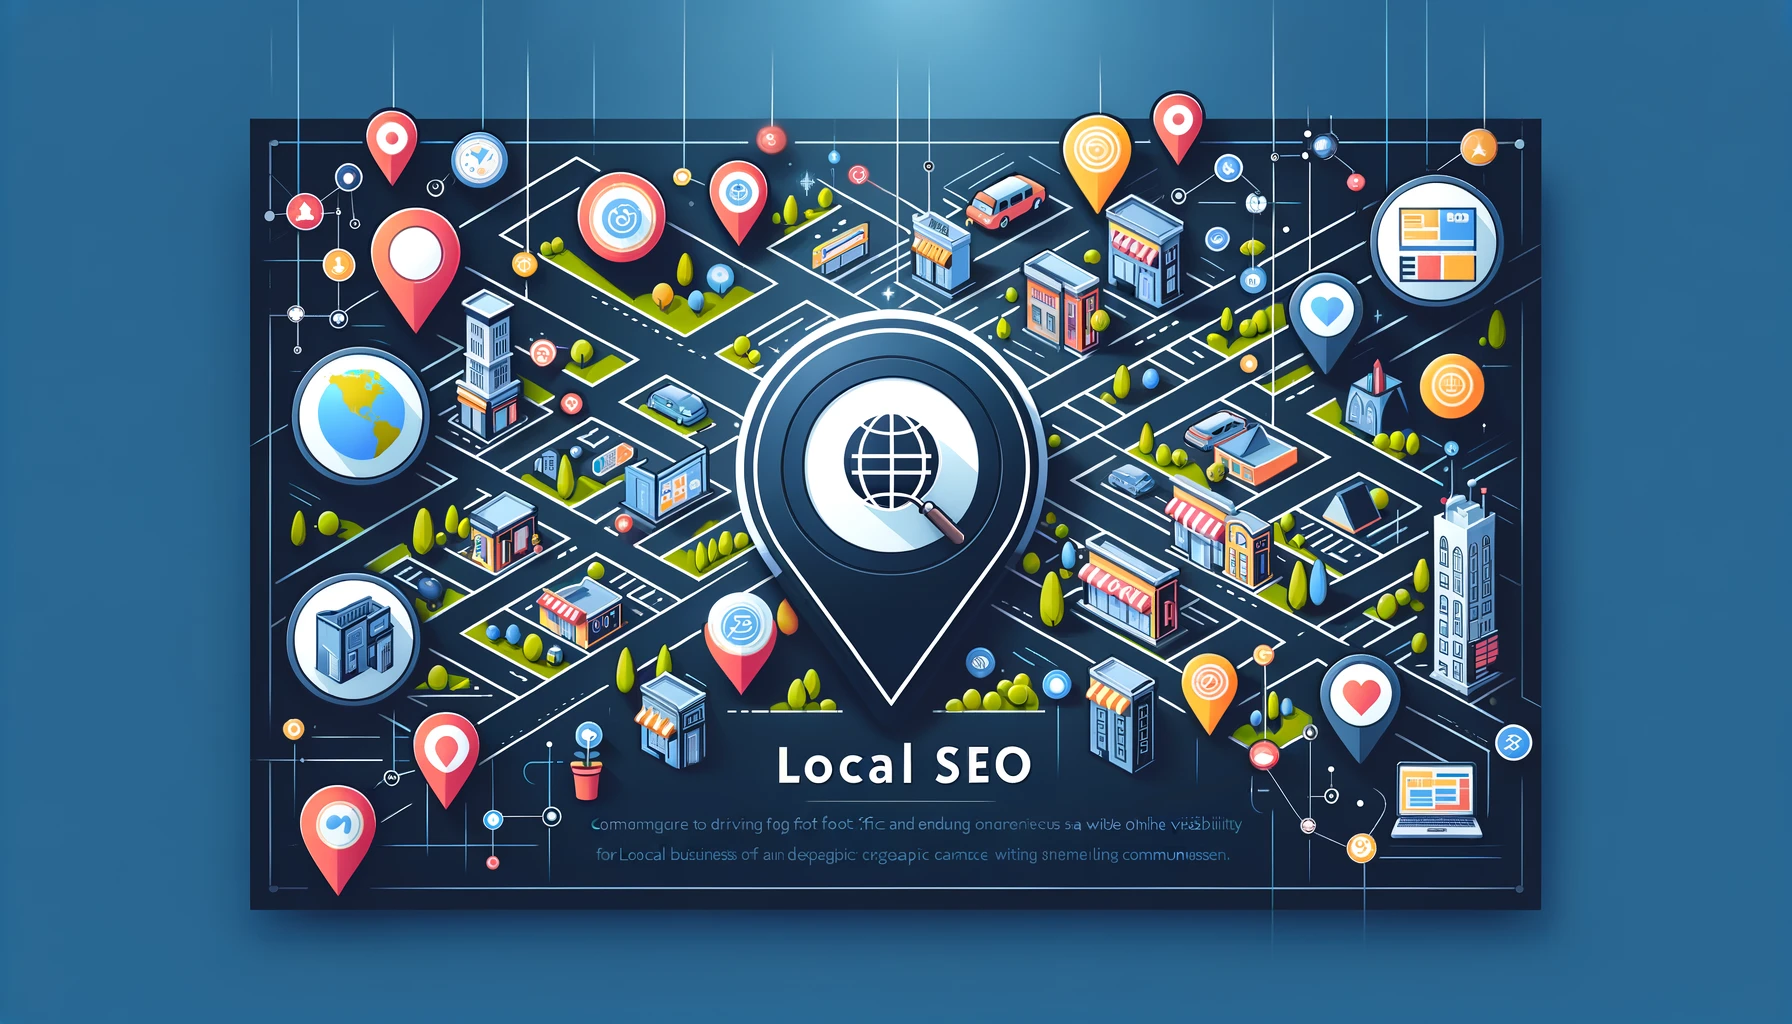 isometric-illustration-of-SEO-link-building-strategy-with-network-connections-between-various-web-elements